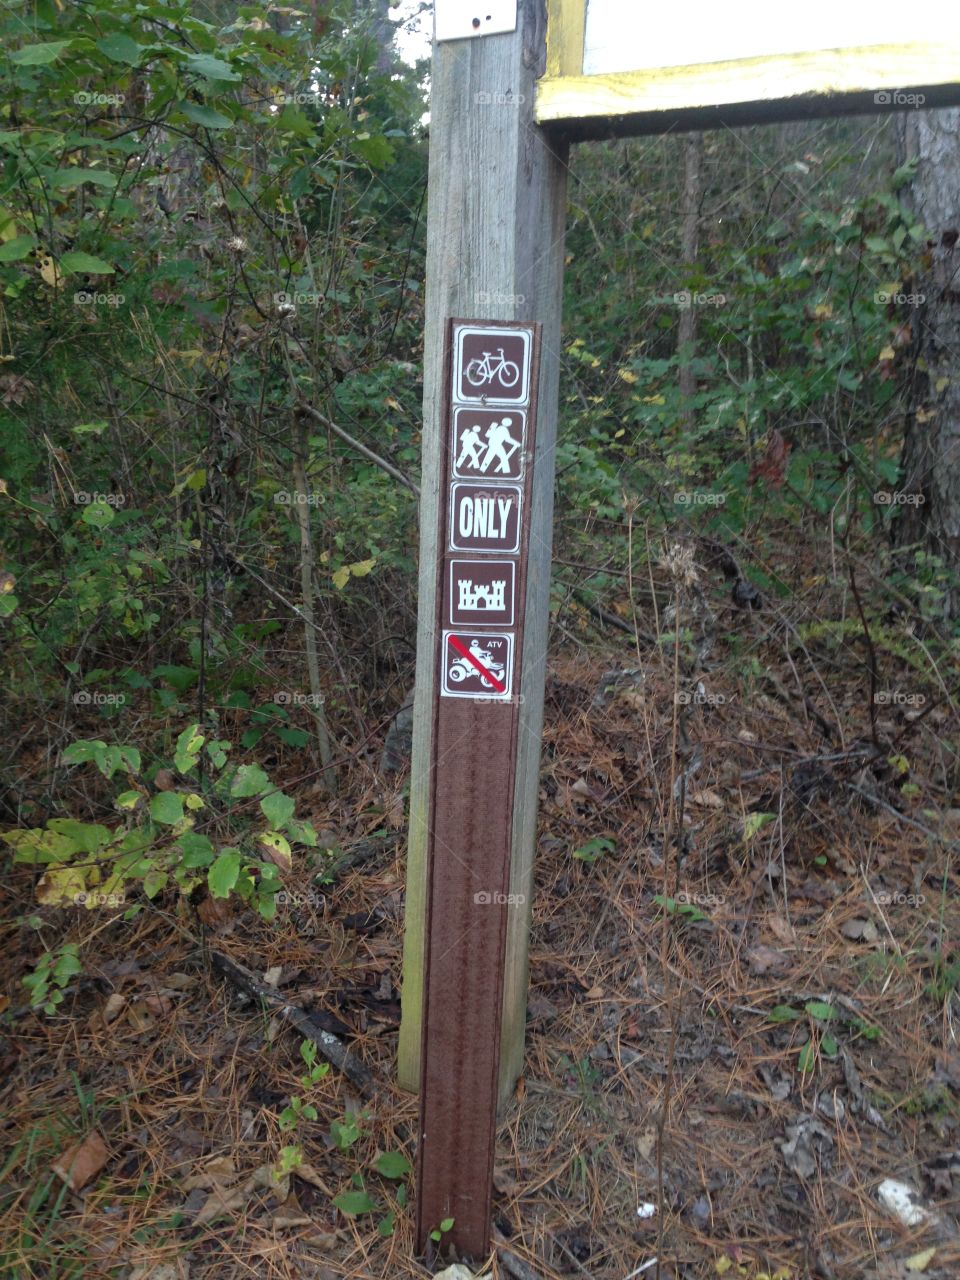 The rules for the hike